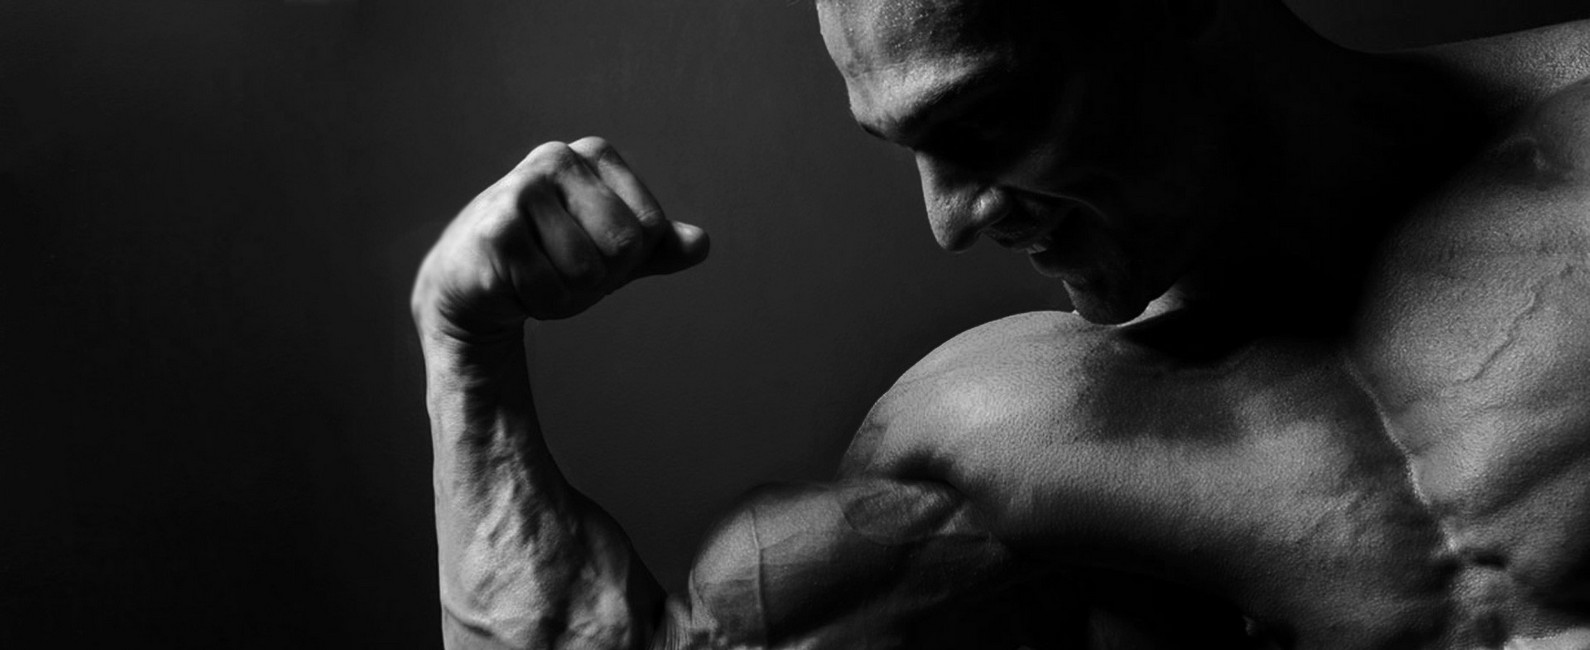 Where to buy safe steroids uk